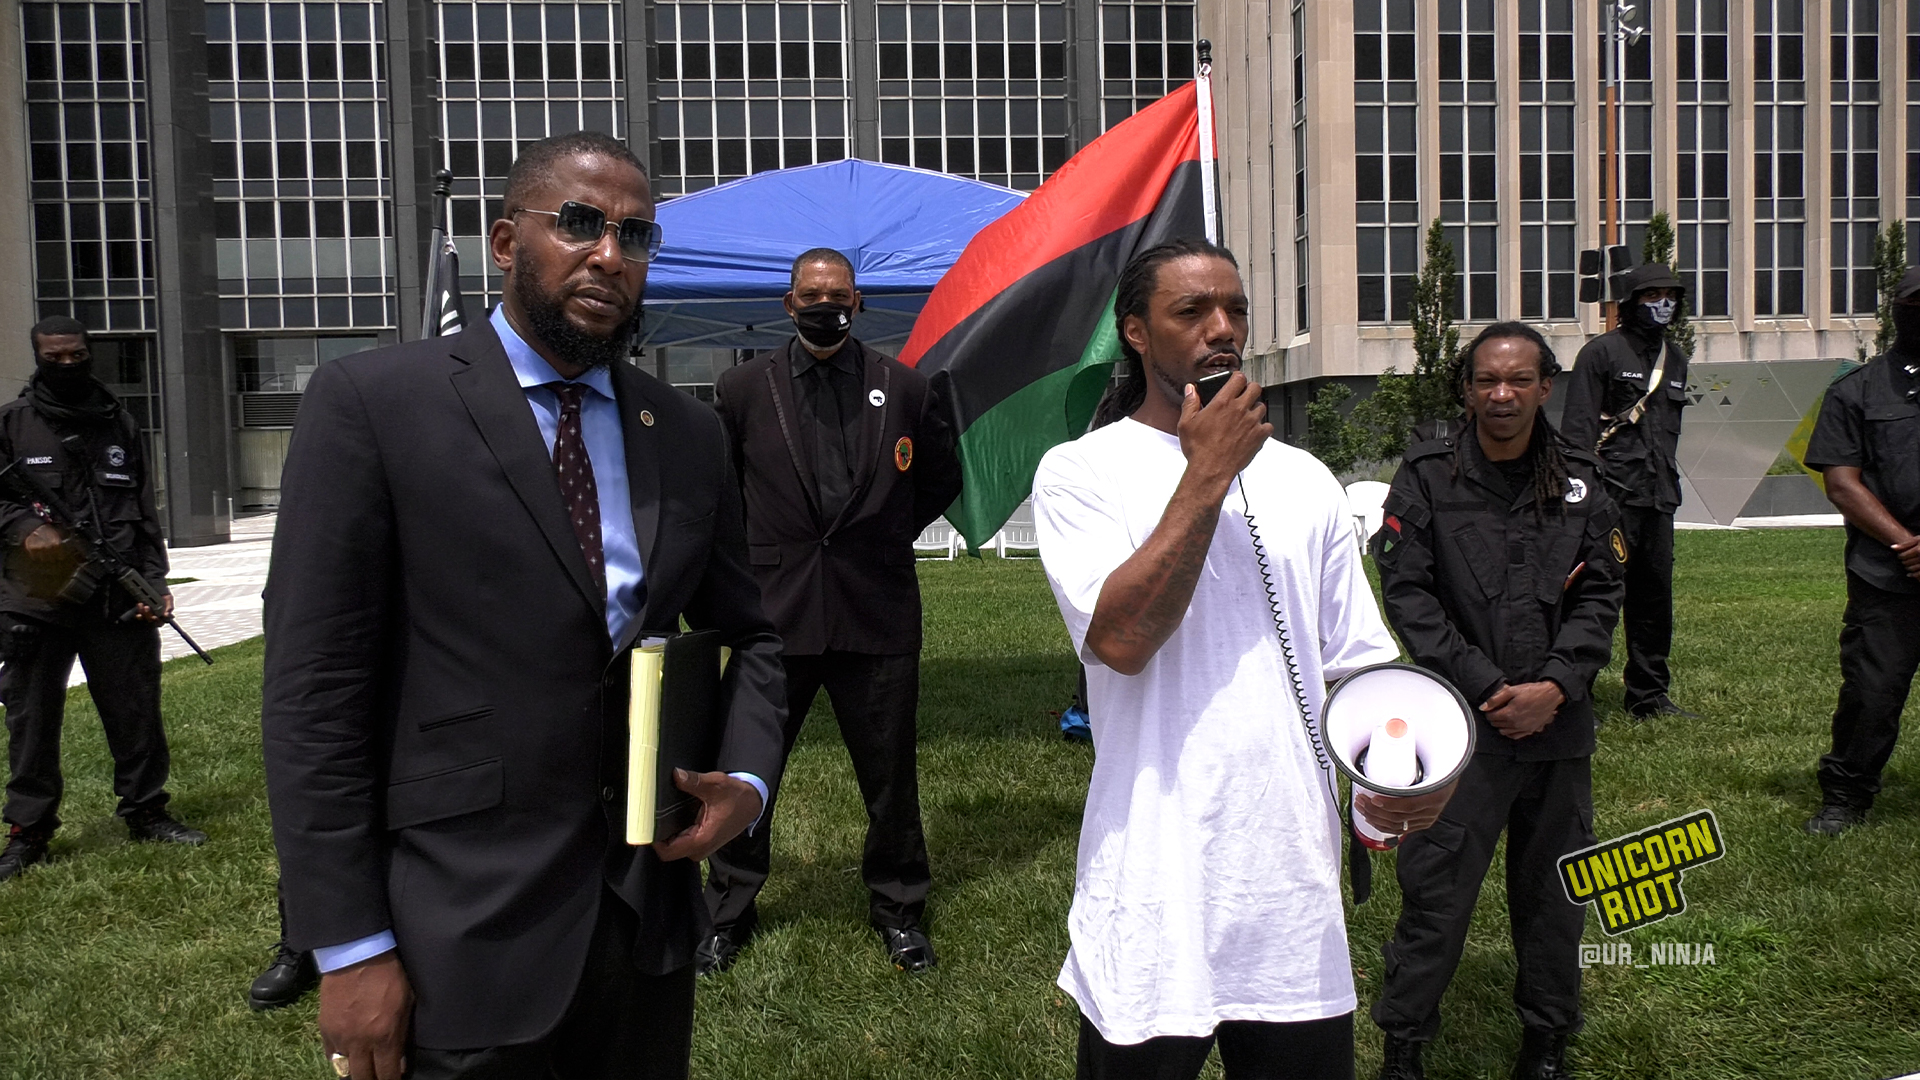 Corey, Dorian Murrell's cousin speaks into megaphone while standing next to family attorney Malik Shabazz and in front of a formation of Black Panther members, some of whom are armed